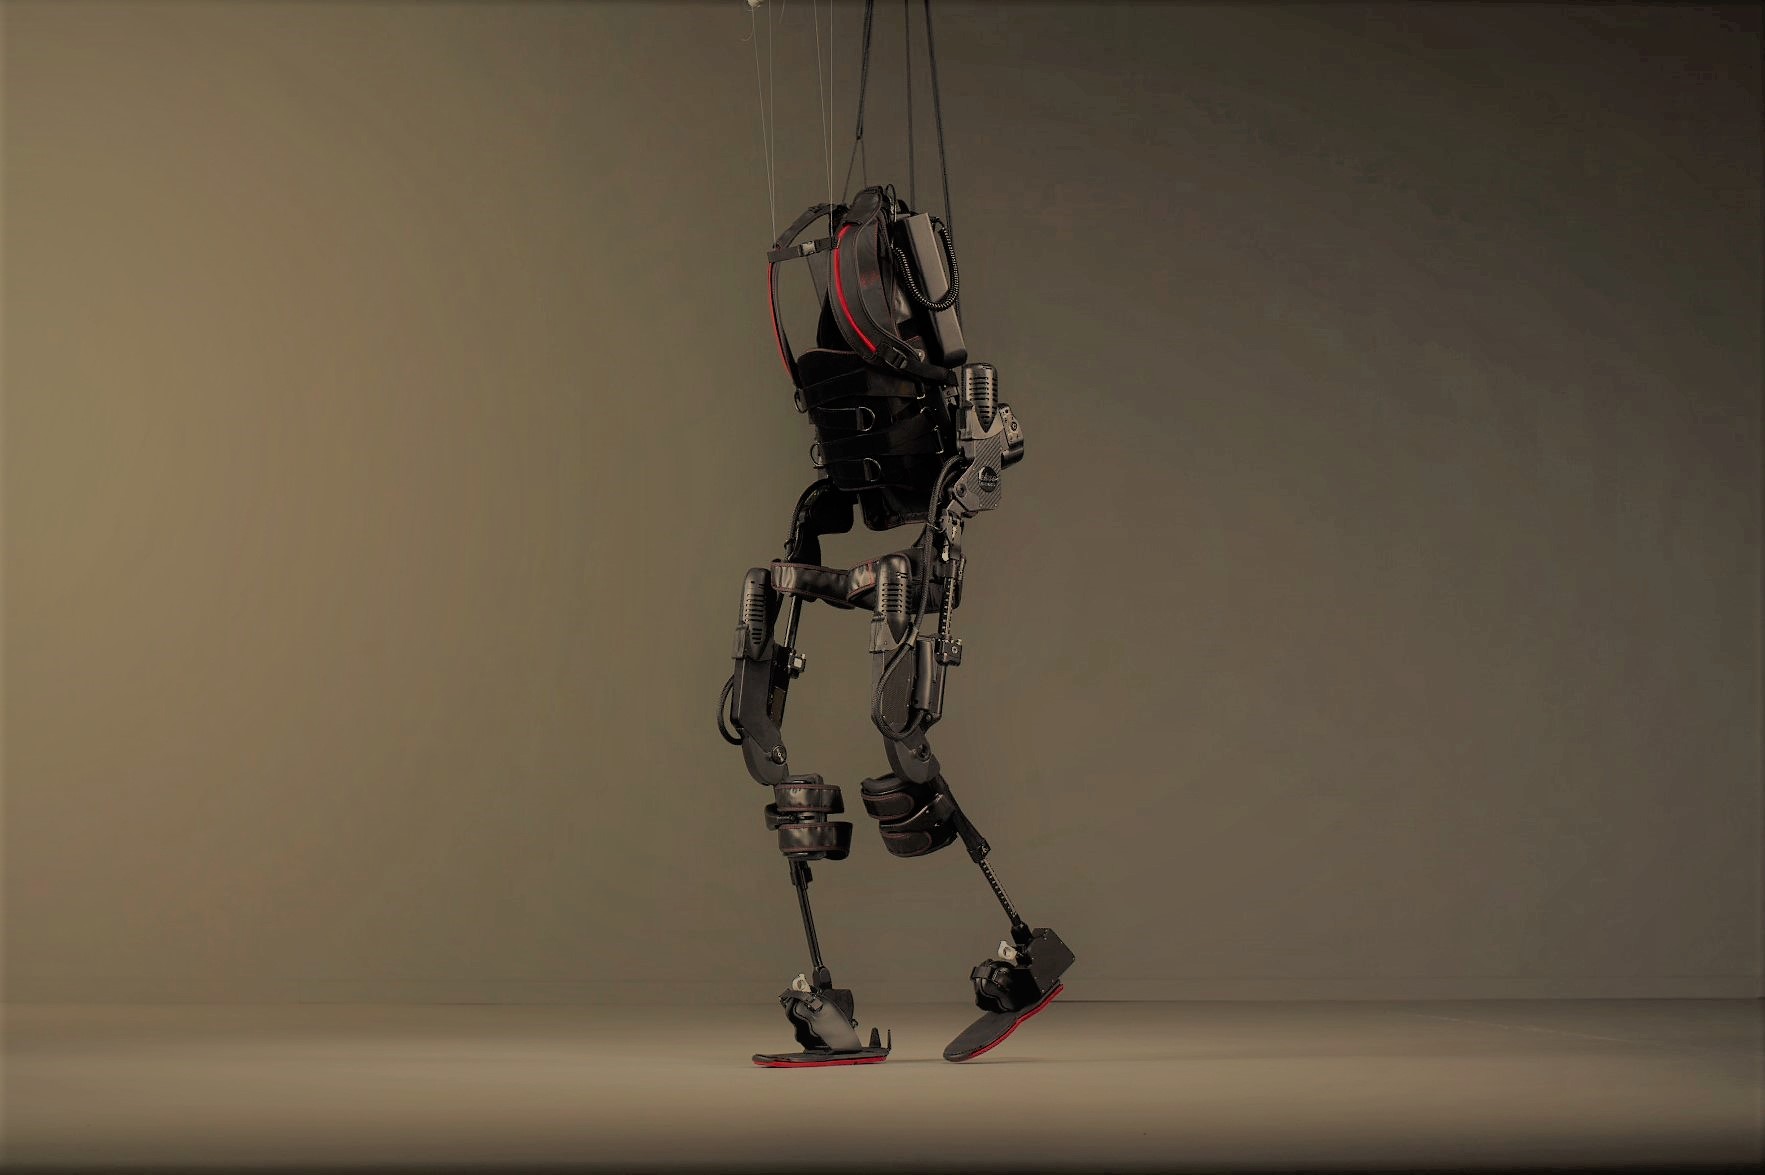 EksoGT is one of the first FDA-cleared exoskeletons for stroke and spinal cord injury rehabilitation.